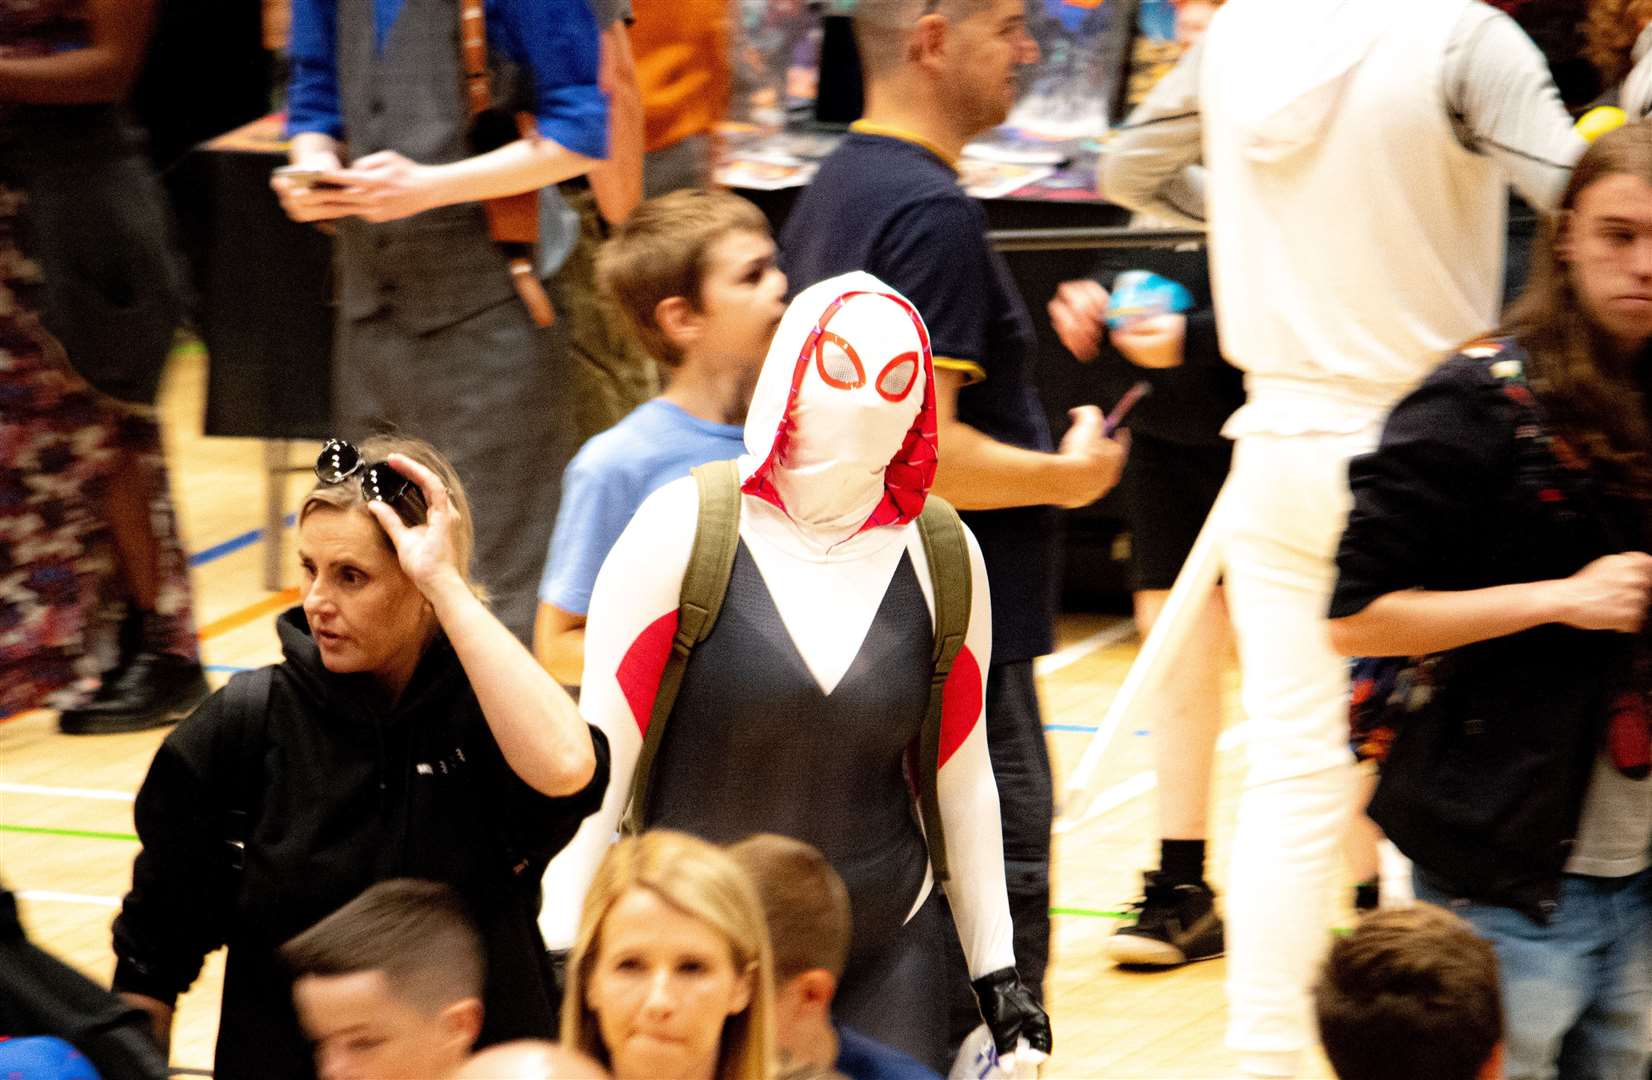 A ComiCon attendee searching for some other spider-people. Photo: Niall Harkiss